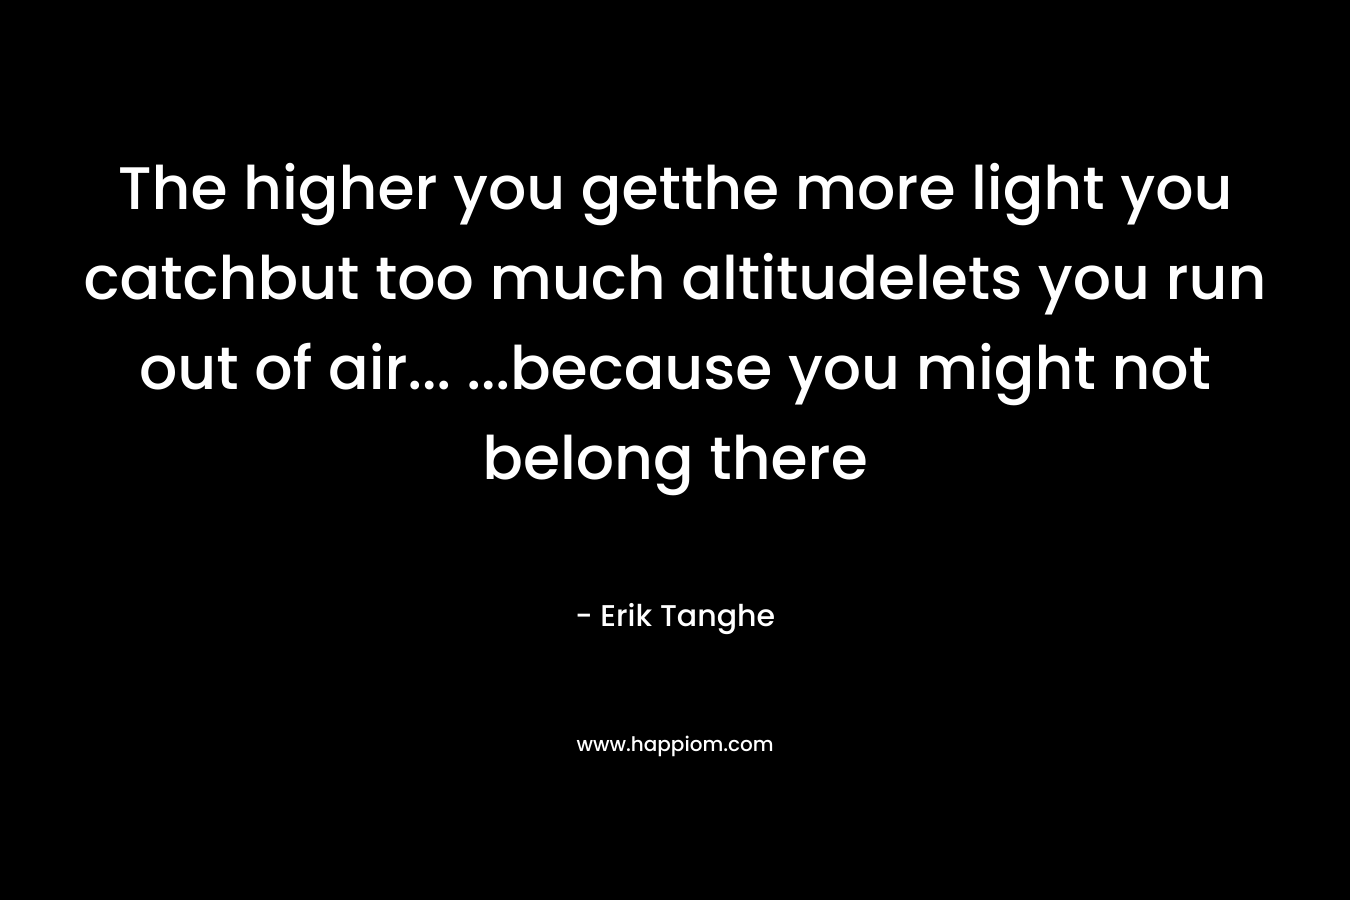 The higher you getthe more light you catchbut too much altitudelets you run out of air... ...because you might not belong there